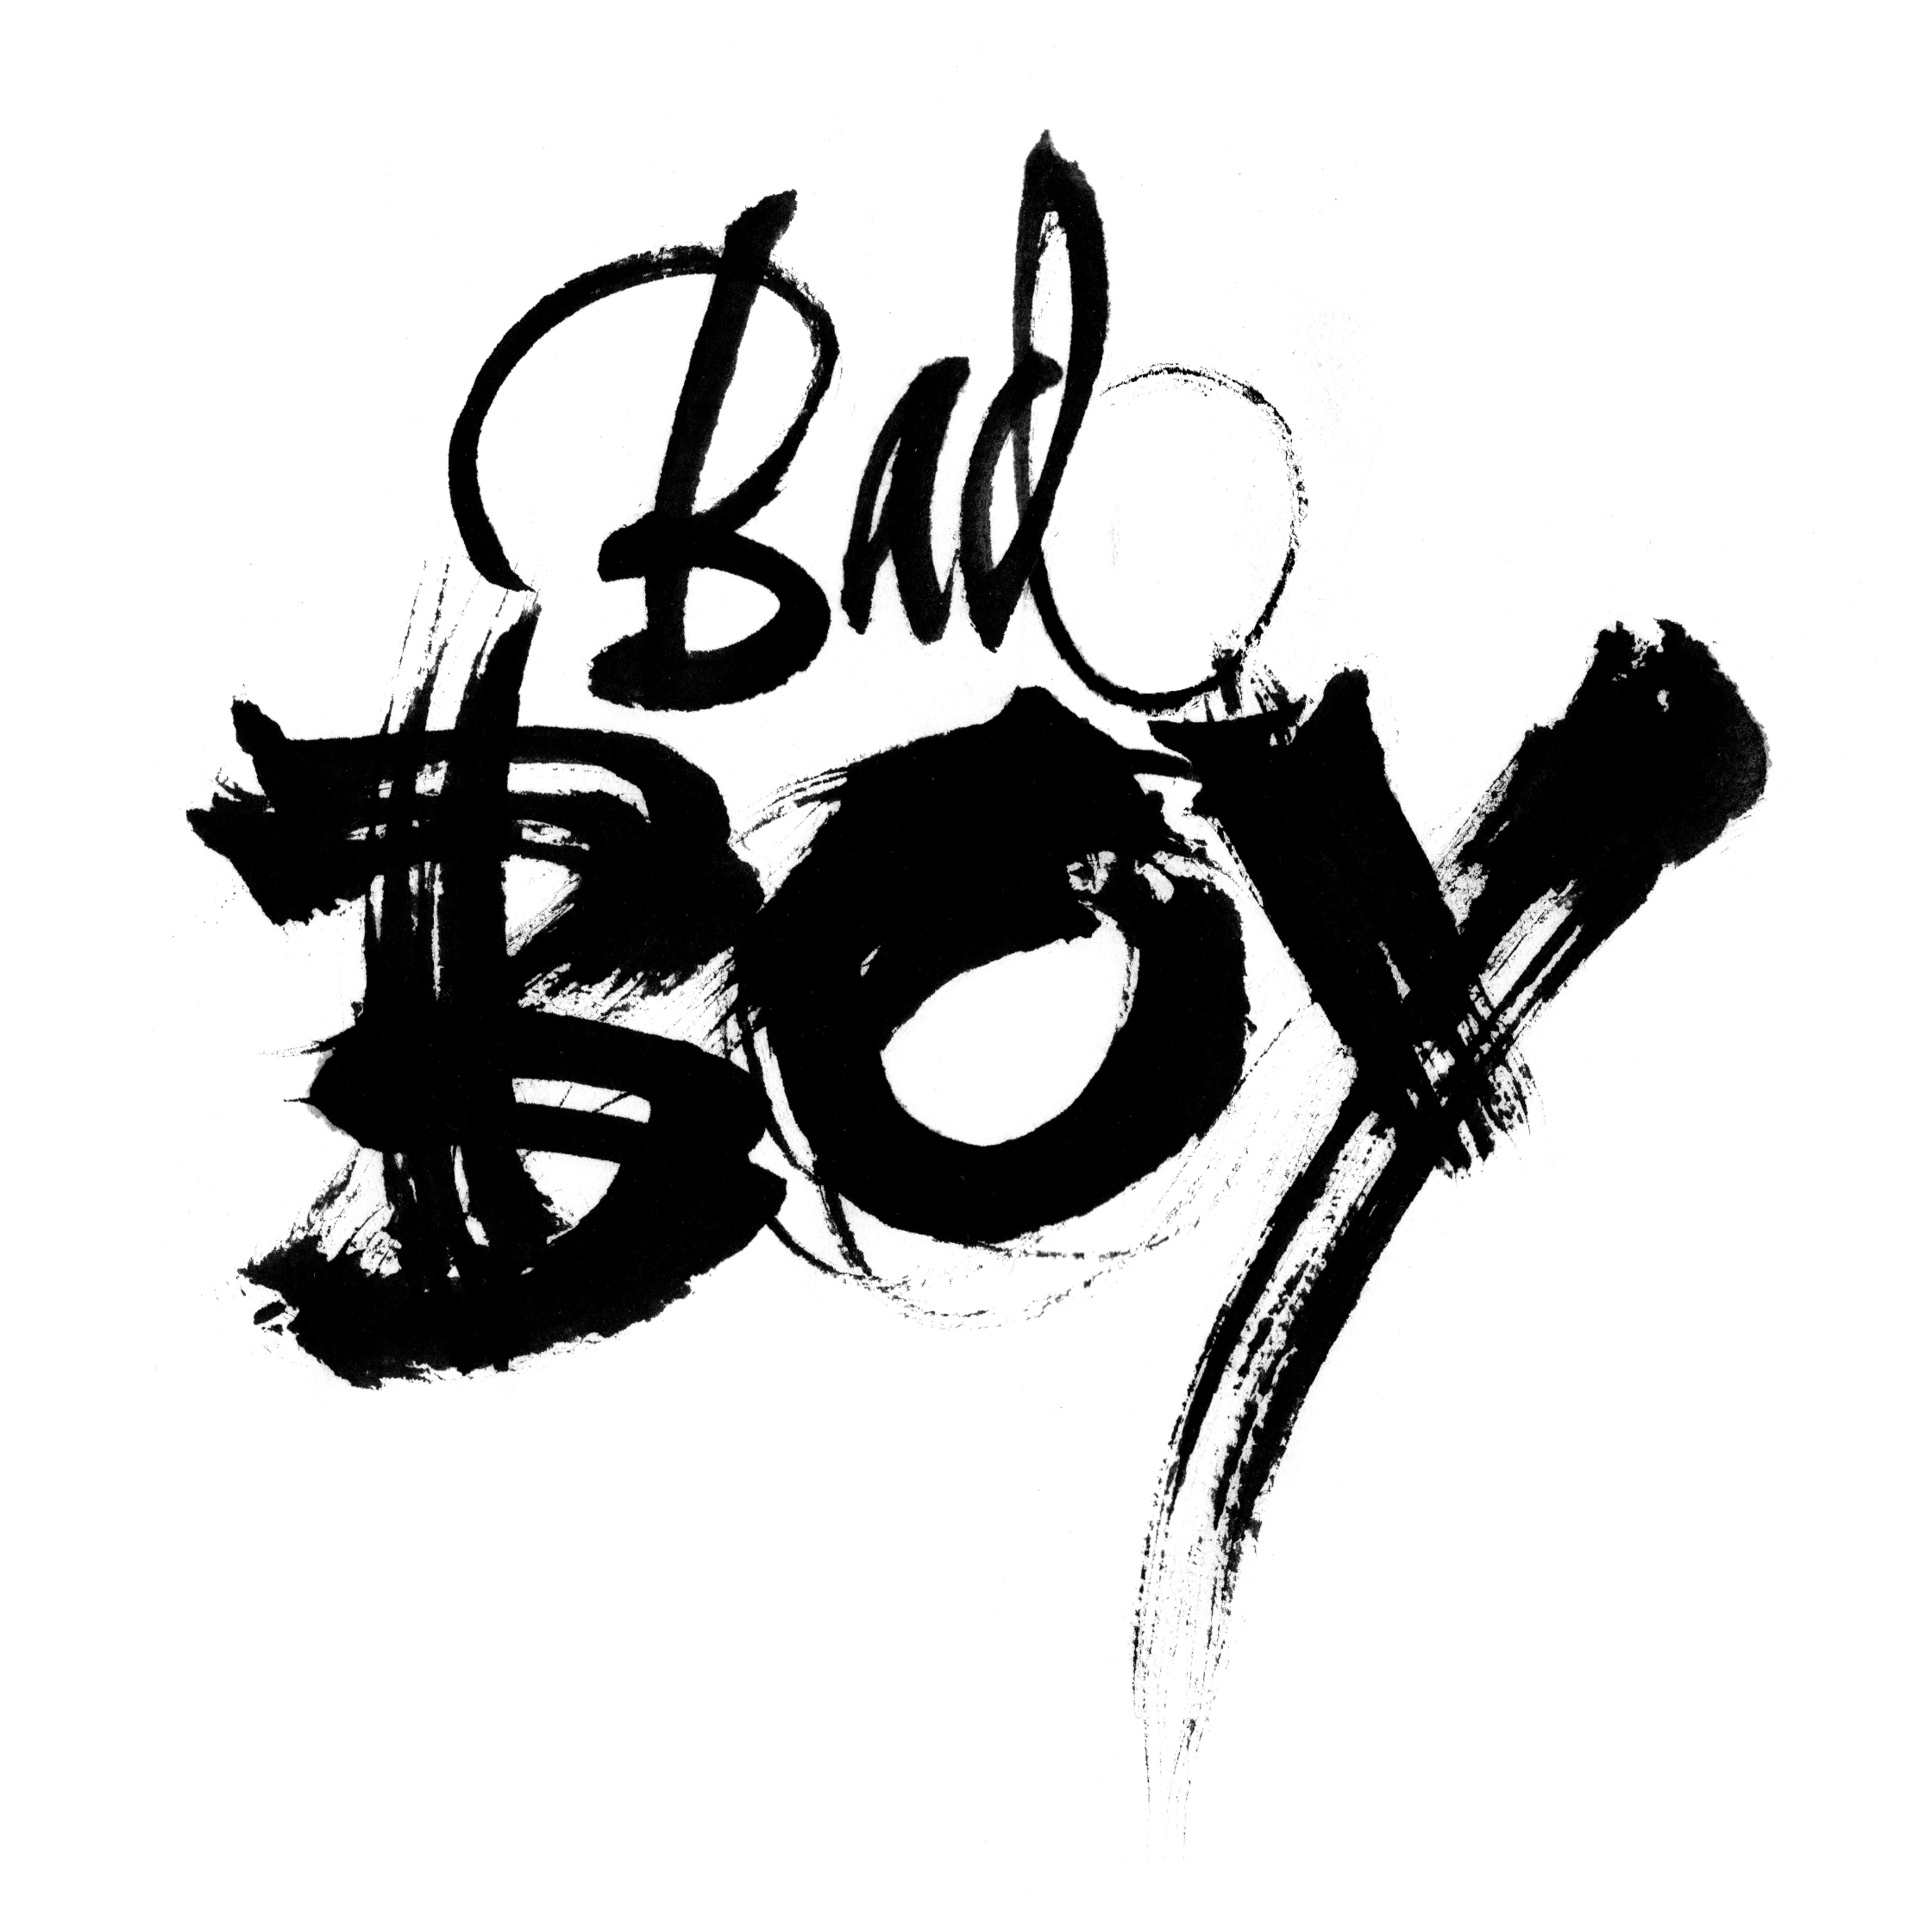 Bad Boy Typography / Oriol Miró - Projects - Debut Art